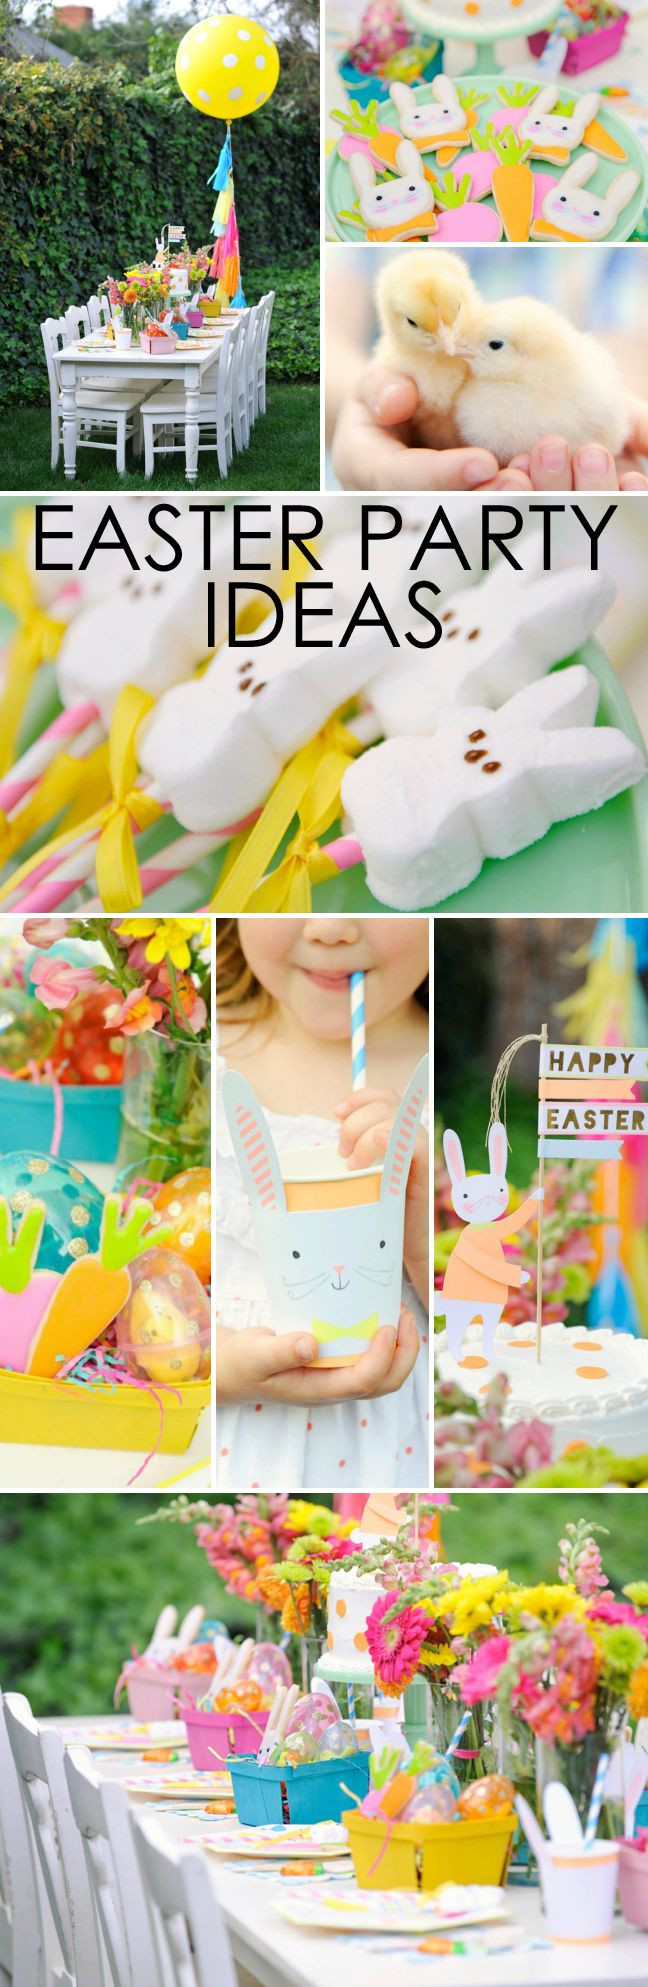 Easter Party Ideas Pinterest
 25 best ideas about Easter Party on Pinterest